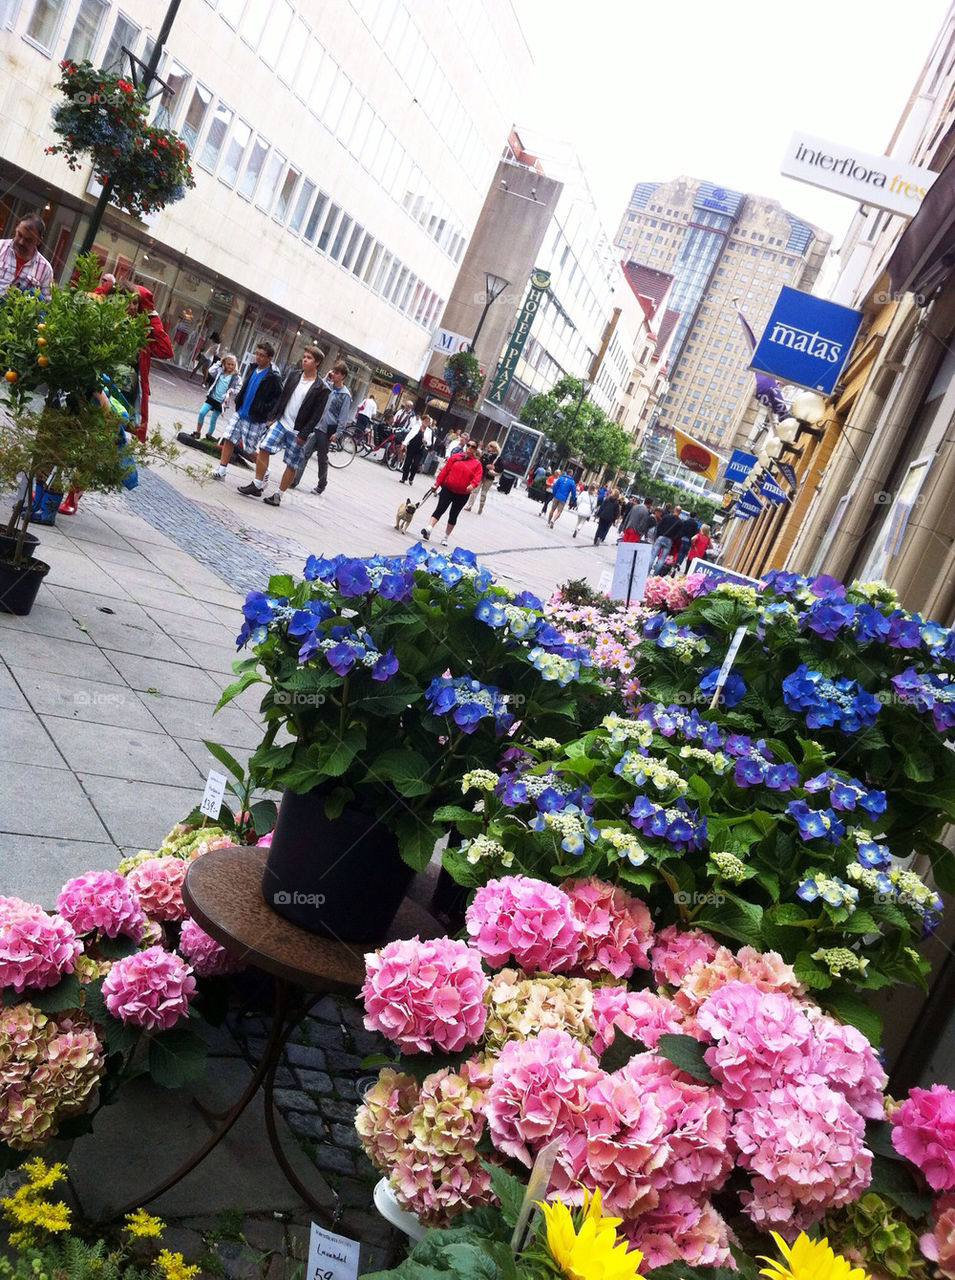 malmö sweden flowers shopping by fabkat